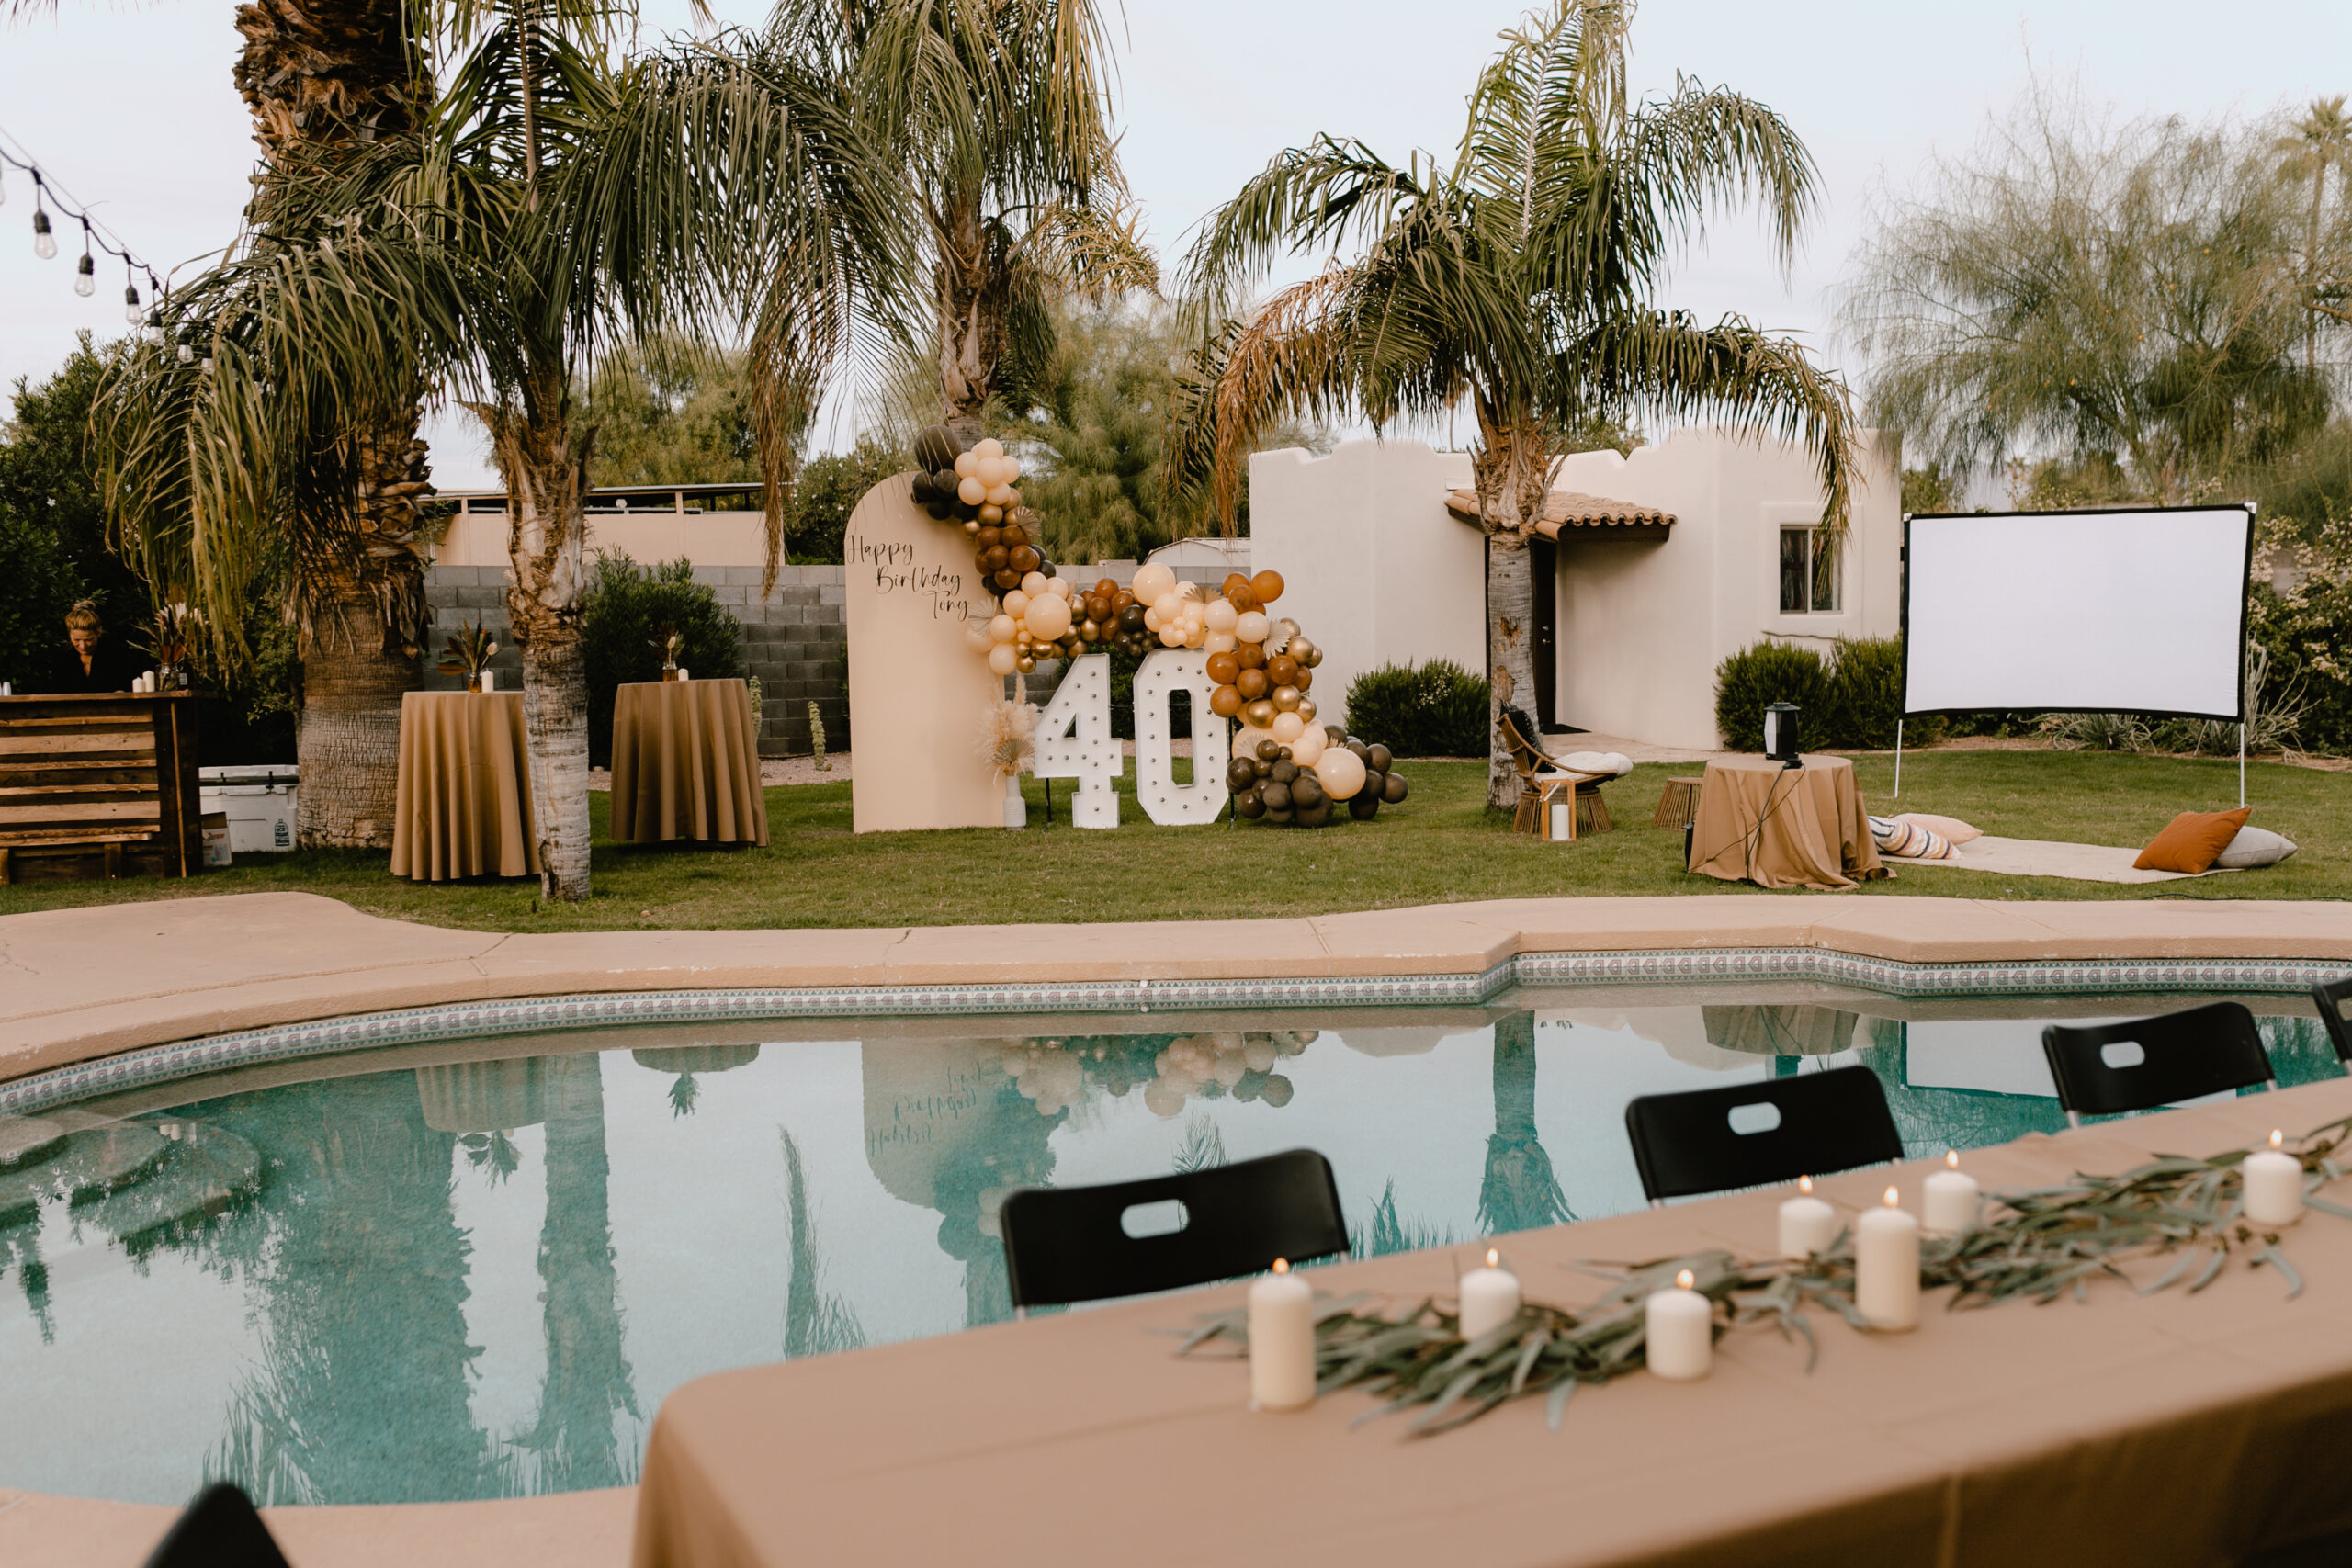 this backyard was the perfect backdrop for a whiskey + cigar themed 40th birthday party #theldlparties #whiskeyandcigars #backyardmovie